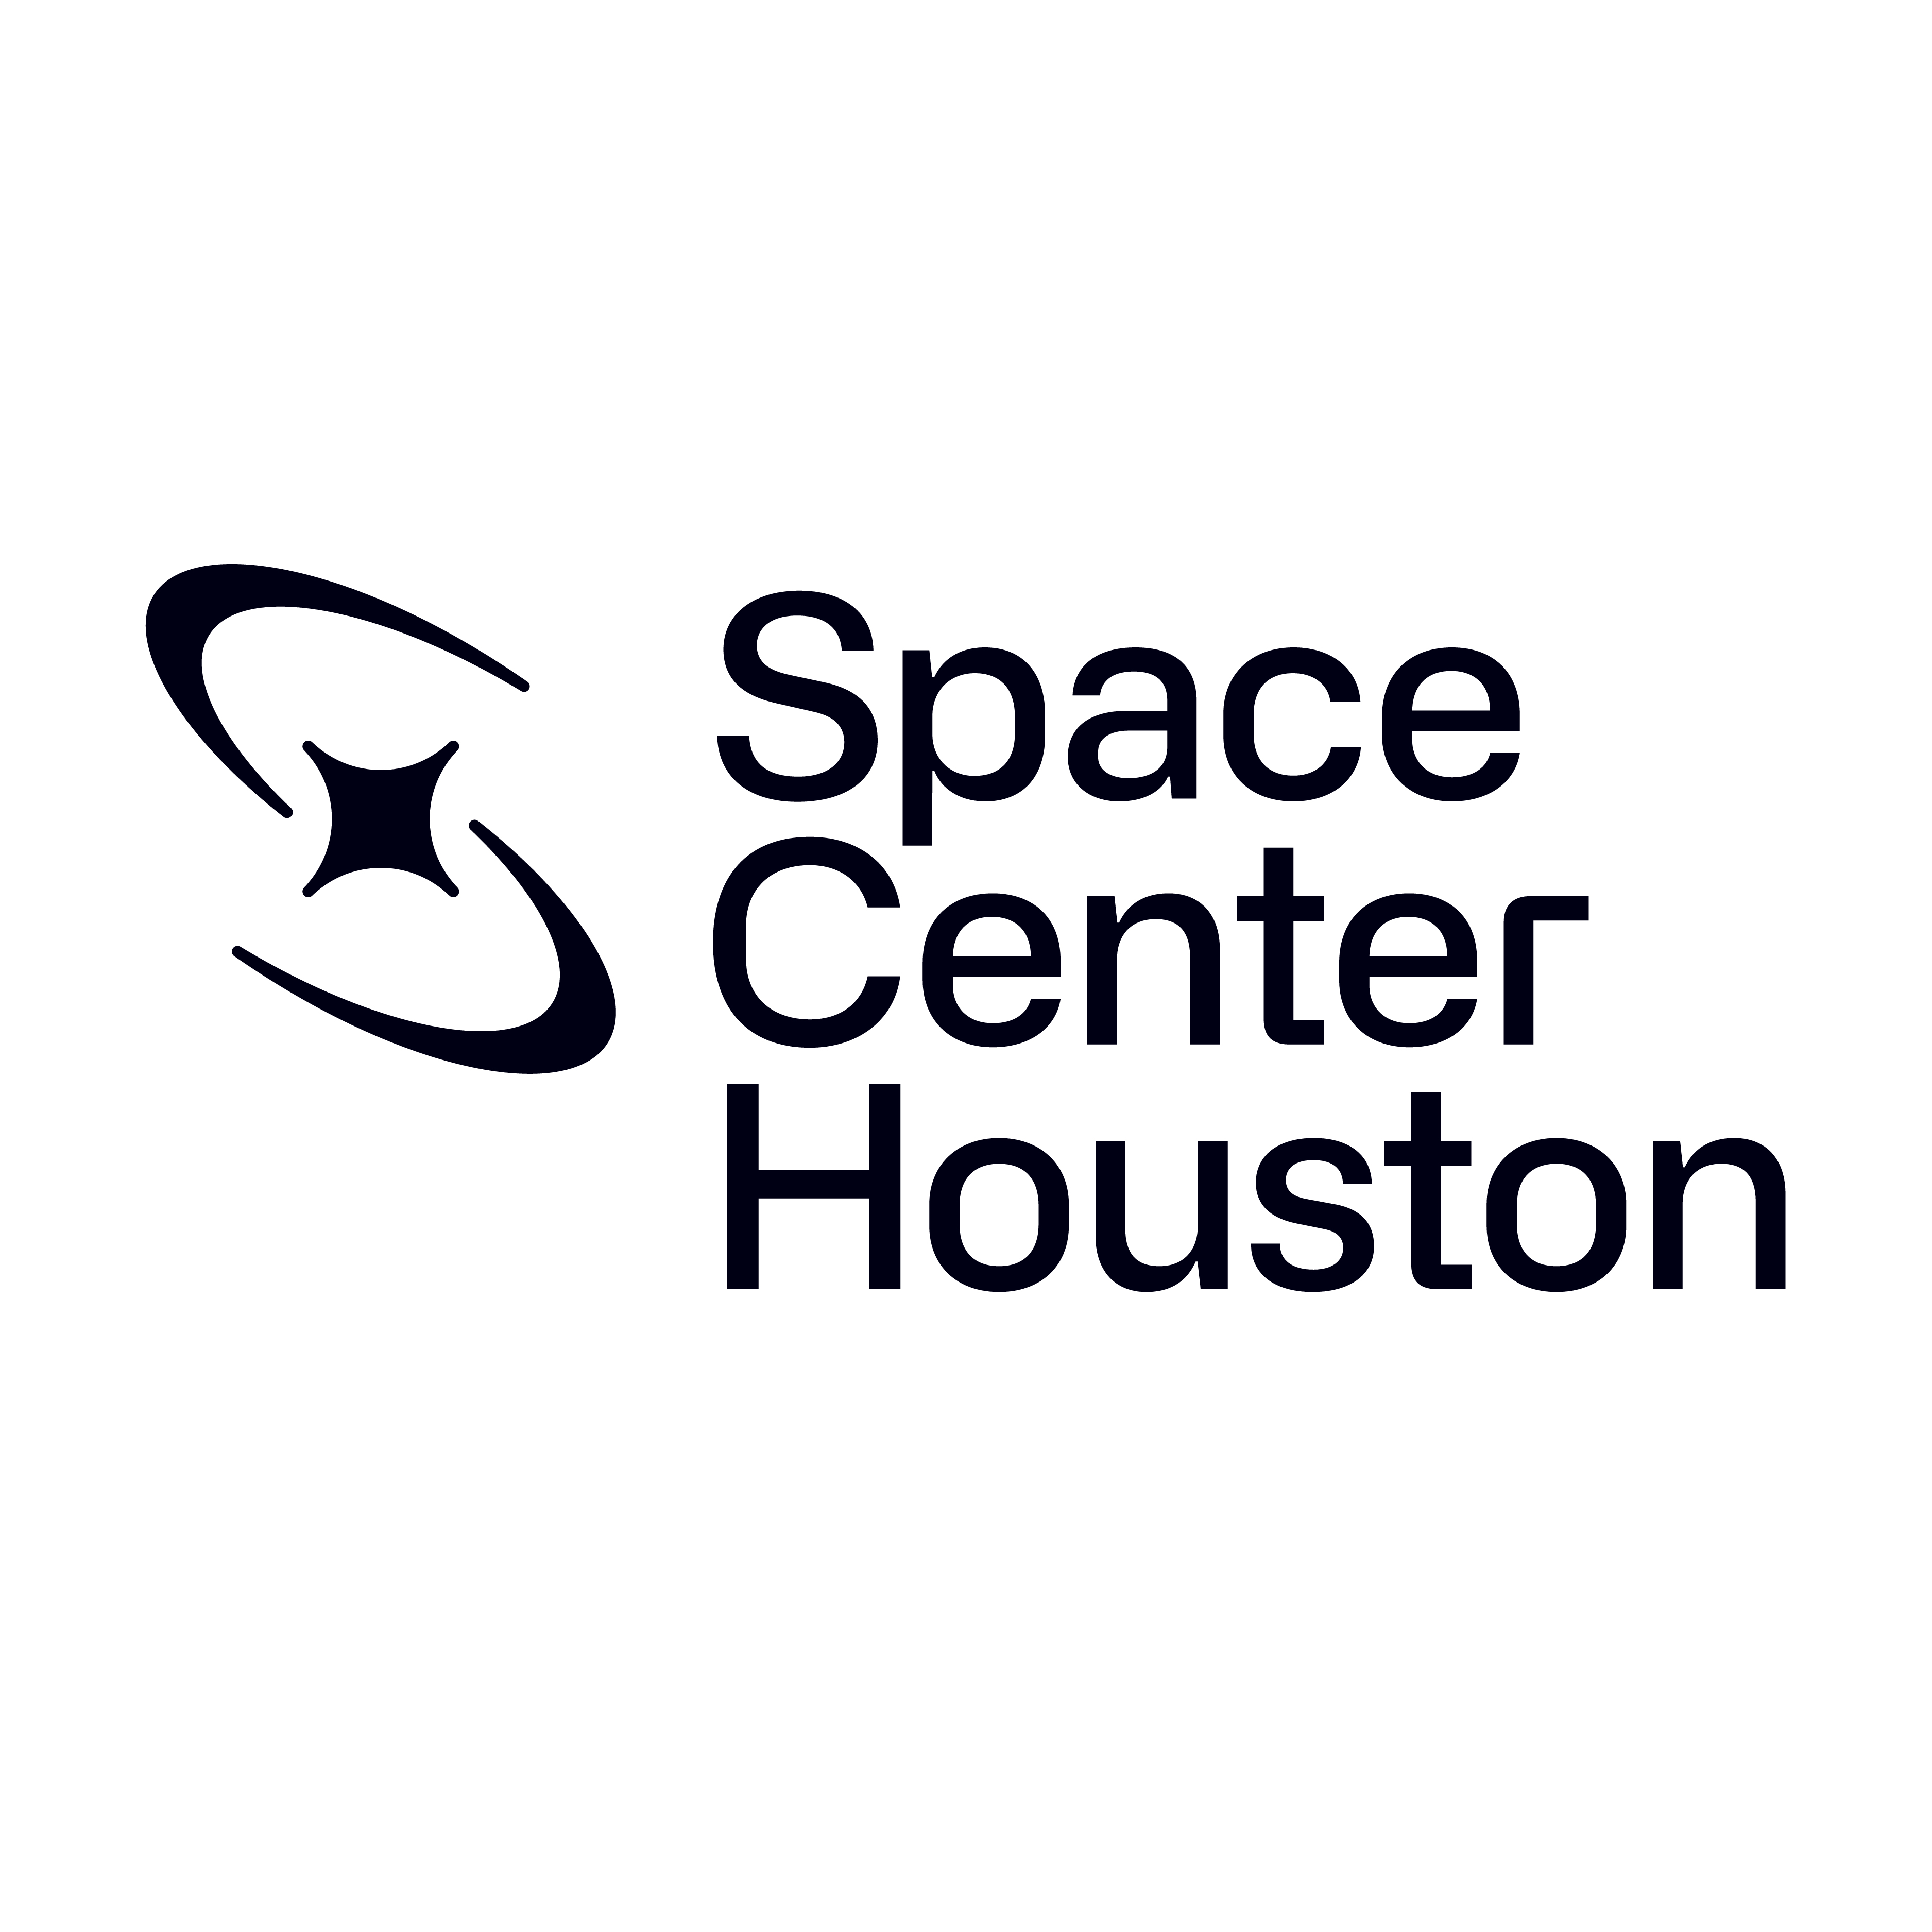 Space Center Houston Logo logo design by logo designer Traina for your inspiration and for the worlds largest logo competition